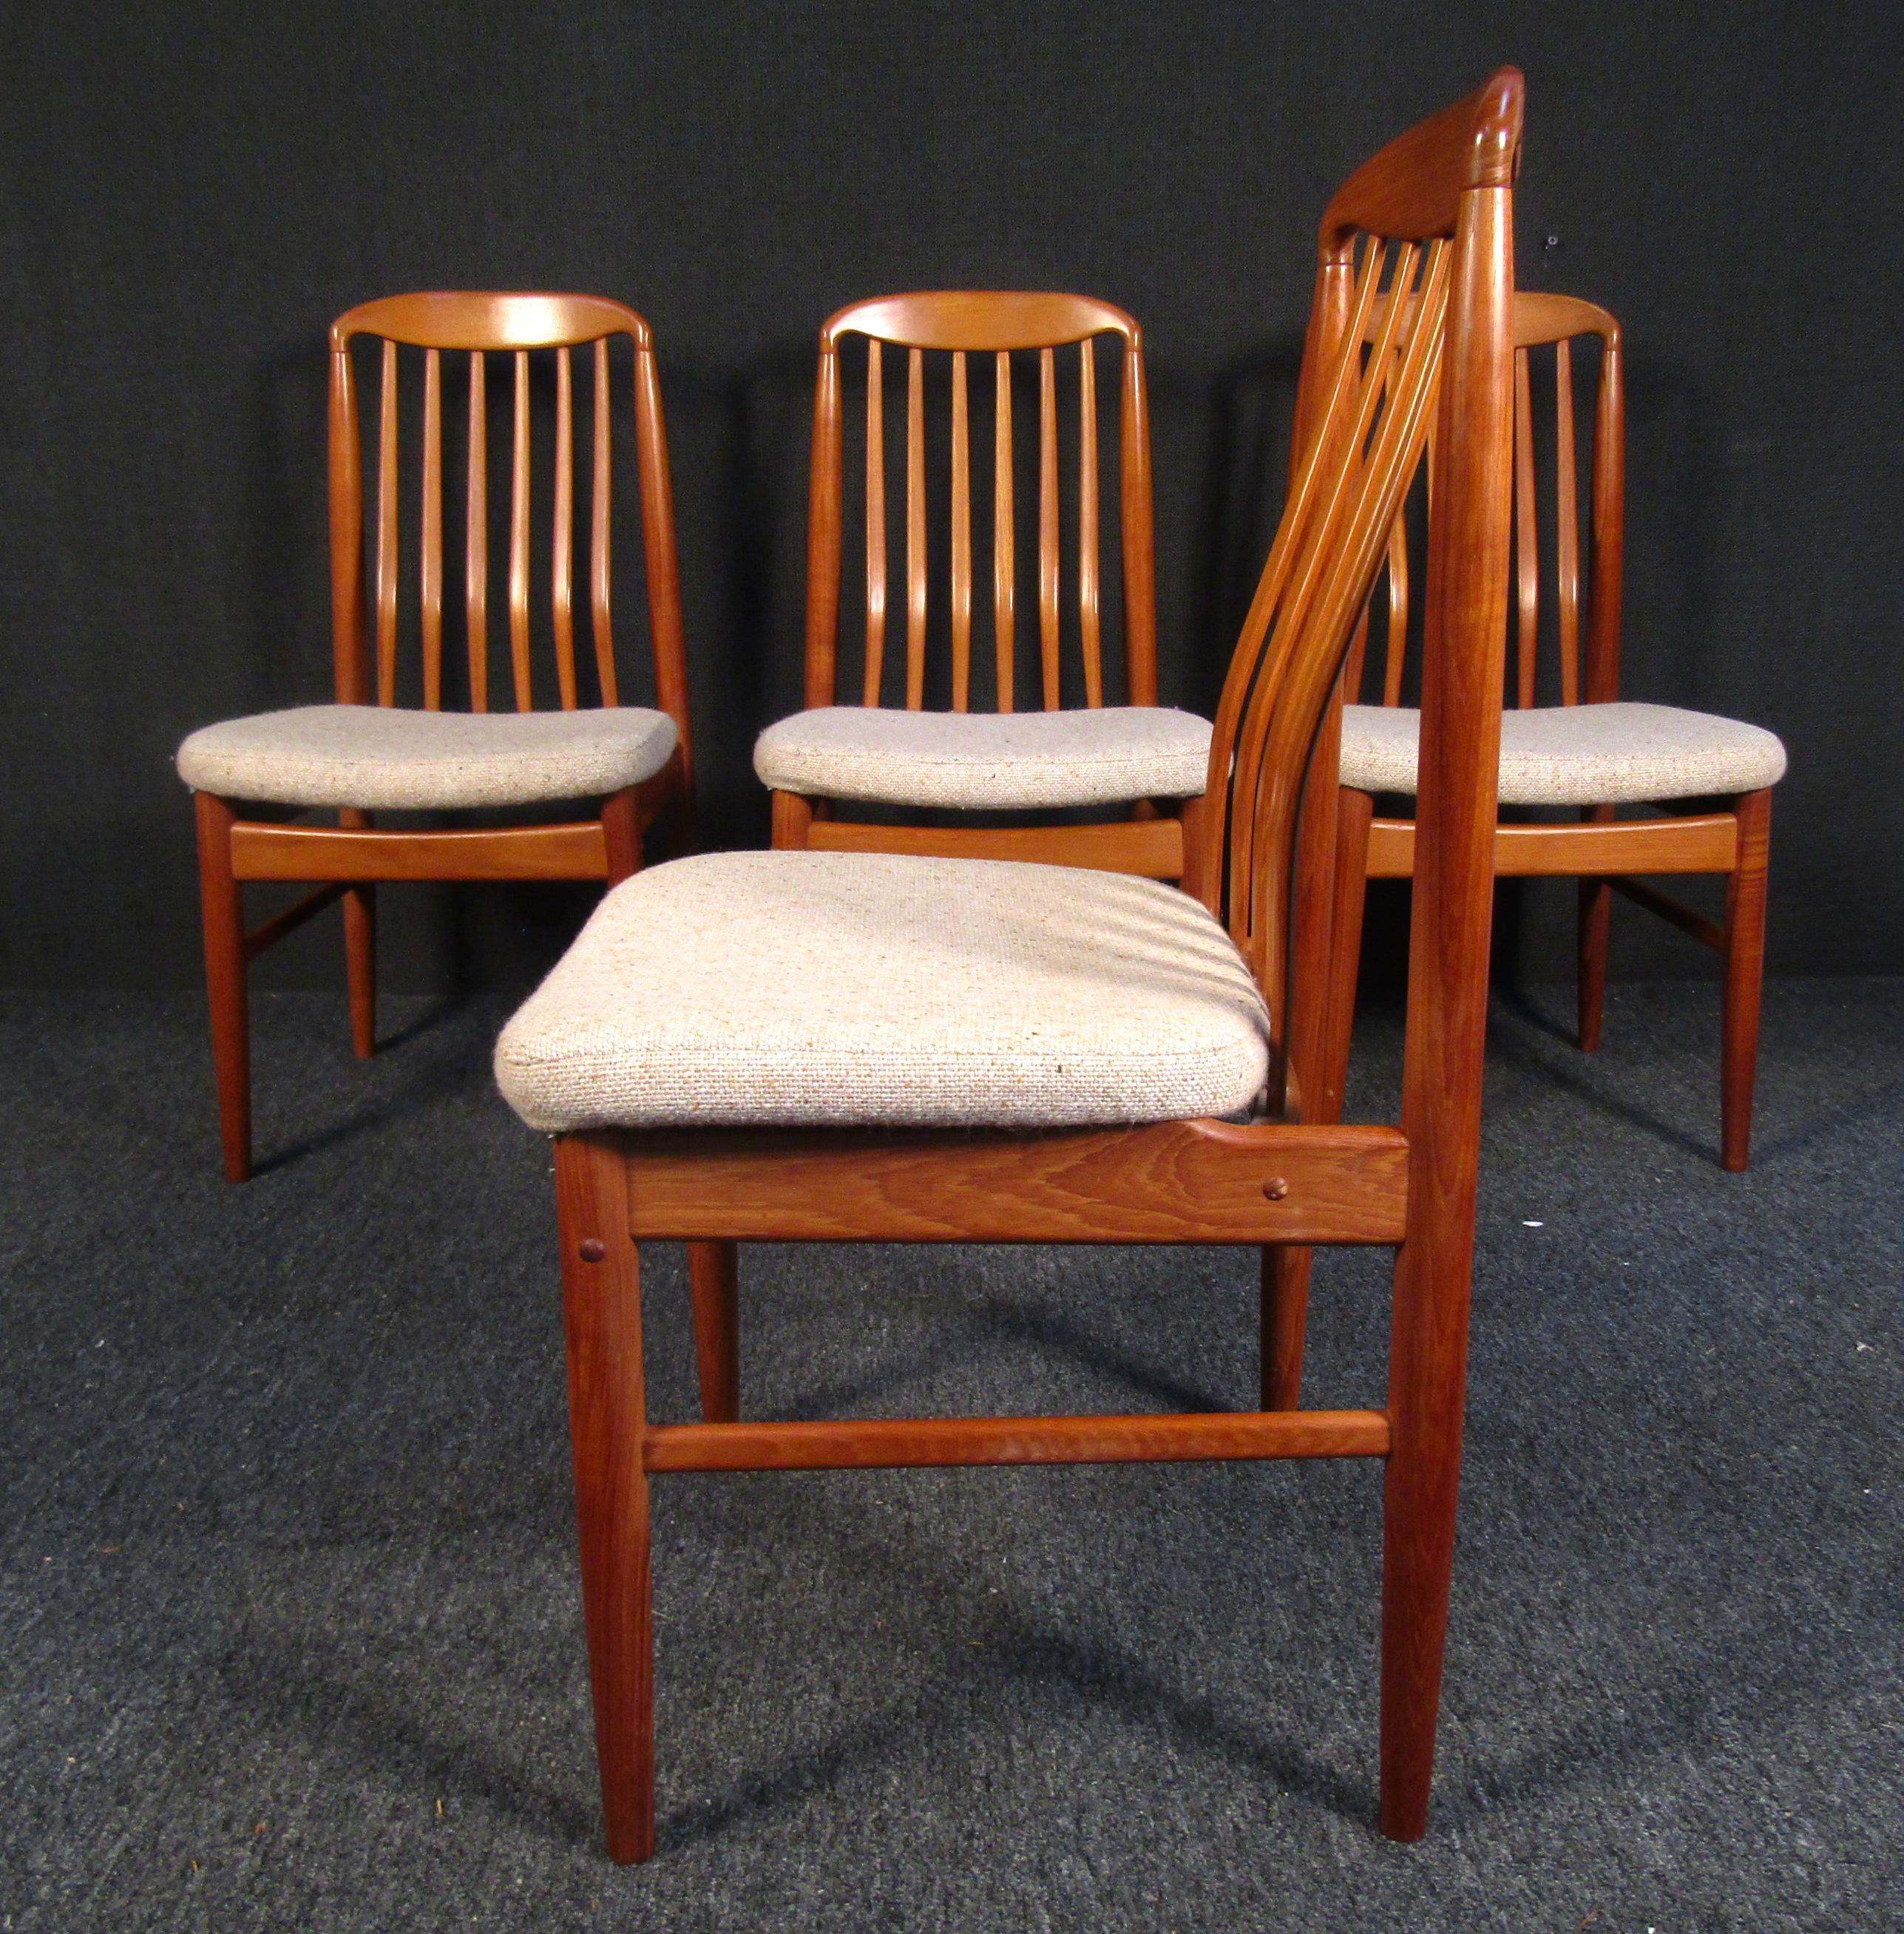 Set of 4 Benny Linden Danish Modern Dining Chairs 1